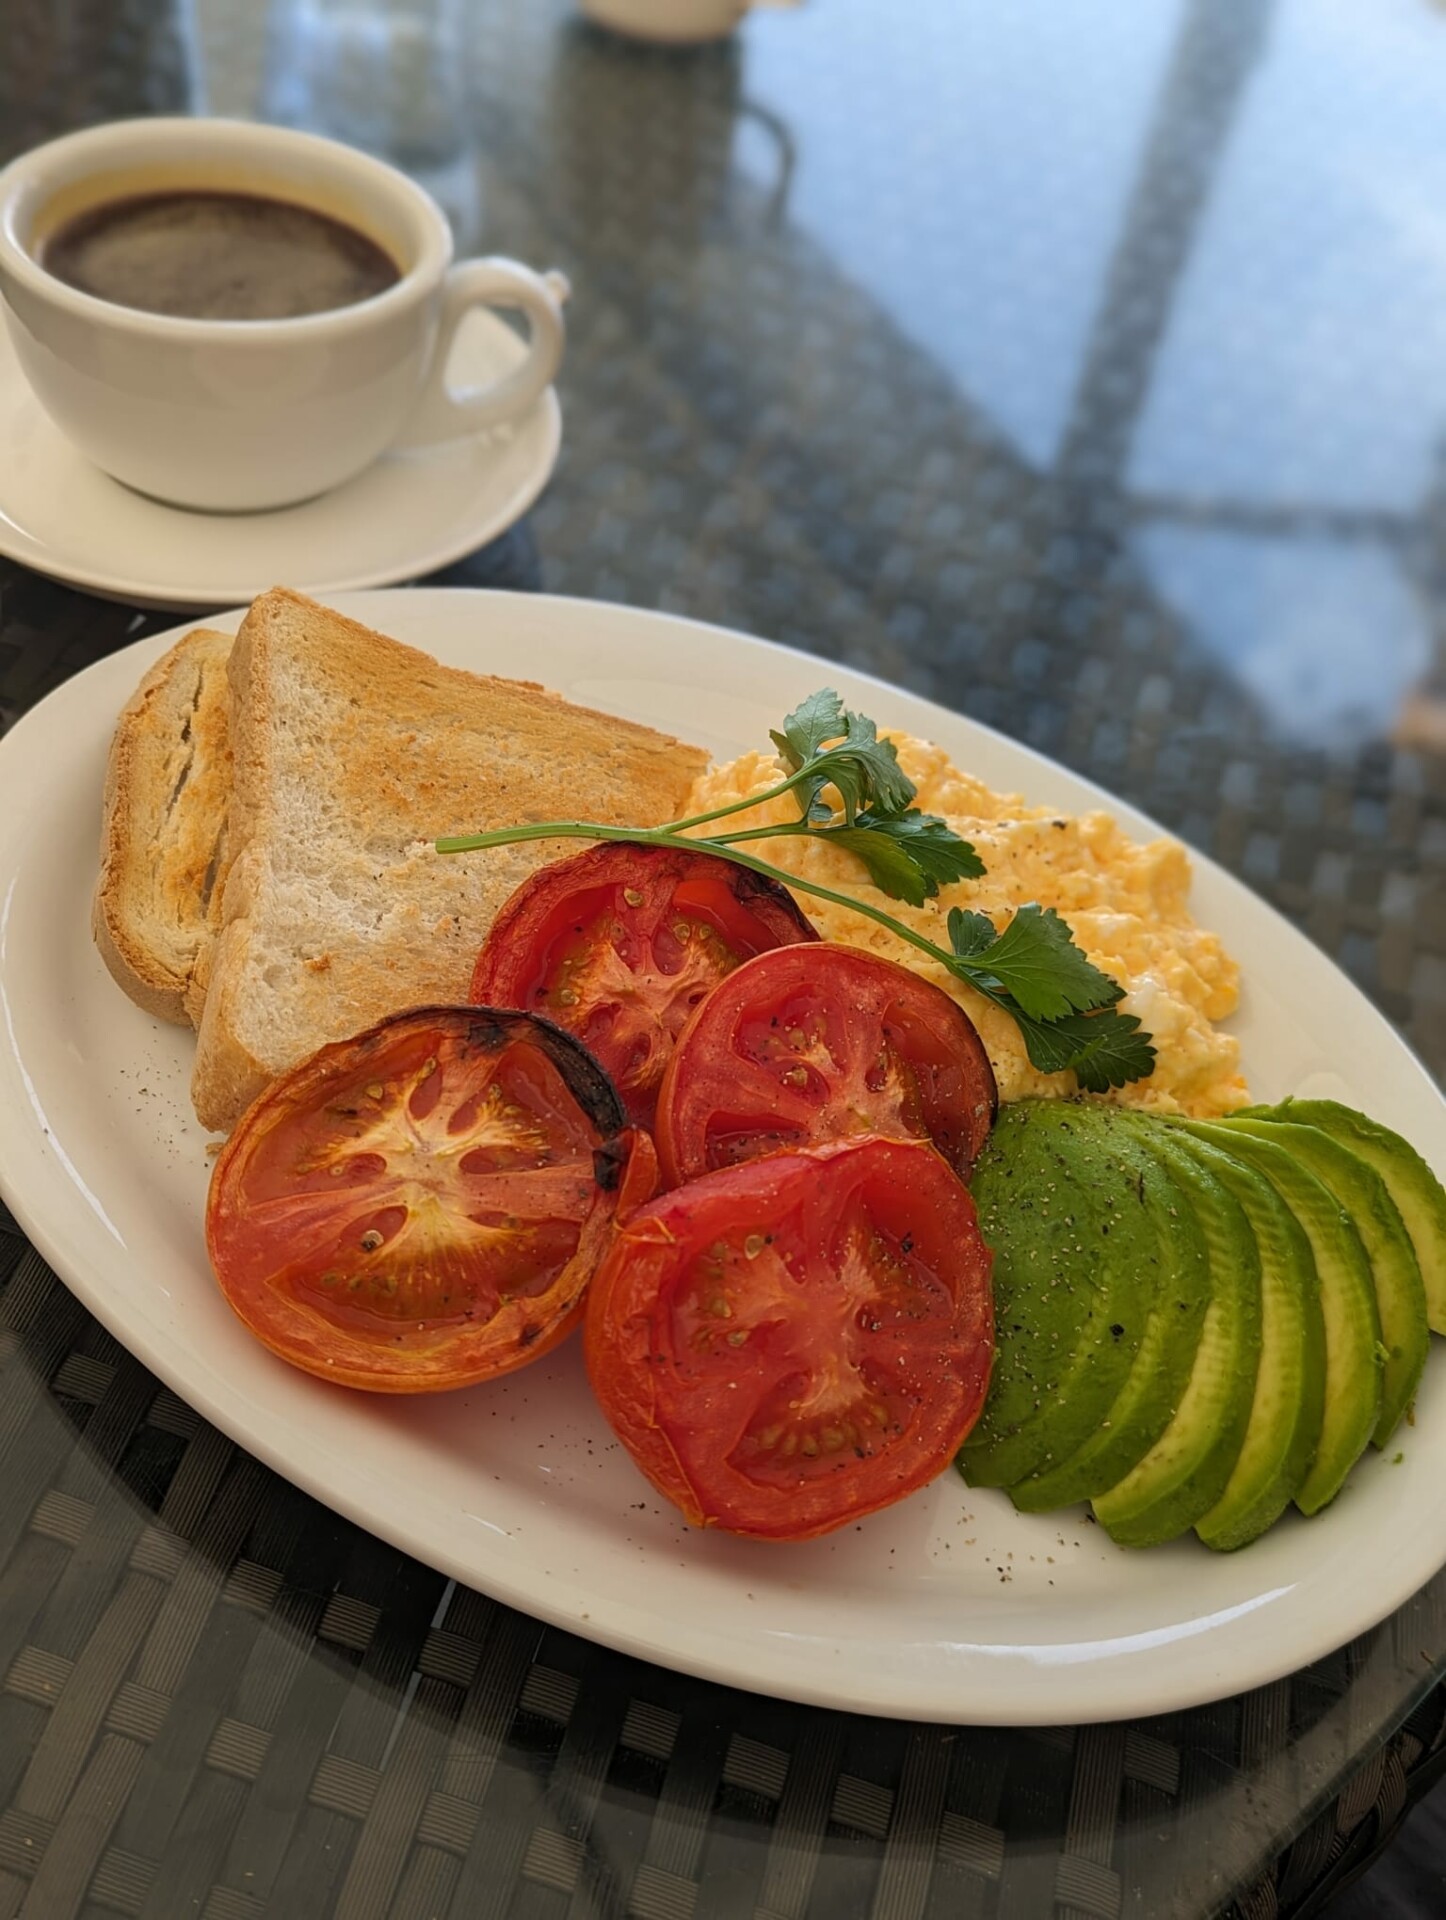 Breakfast at Vegetable matters Farm shop - toast, eggs, tomatoes and avocado